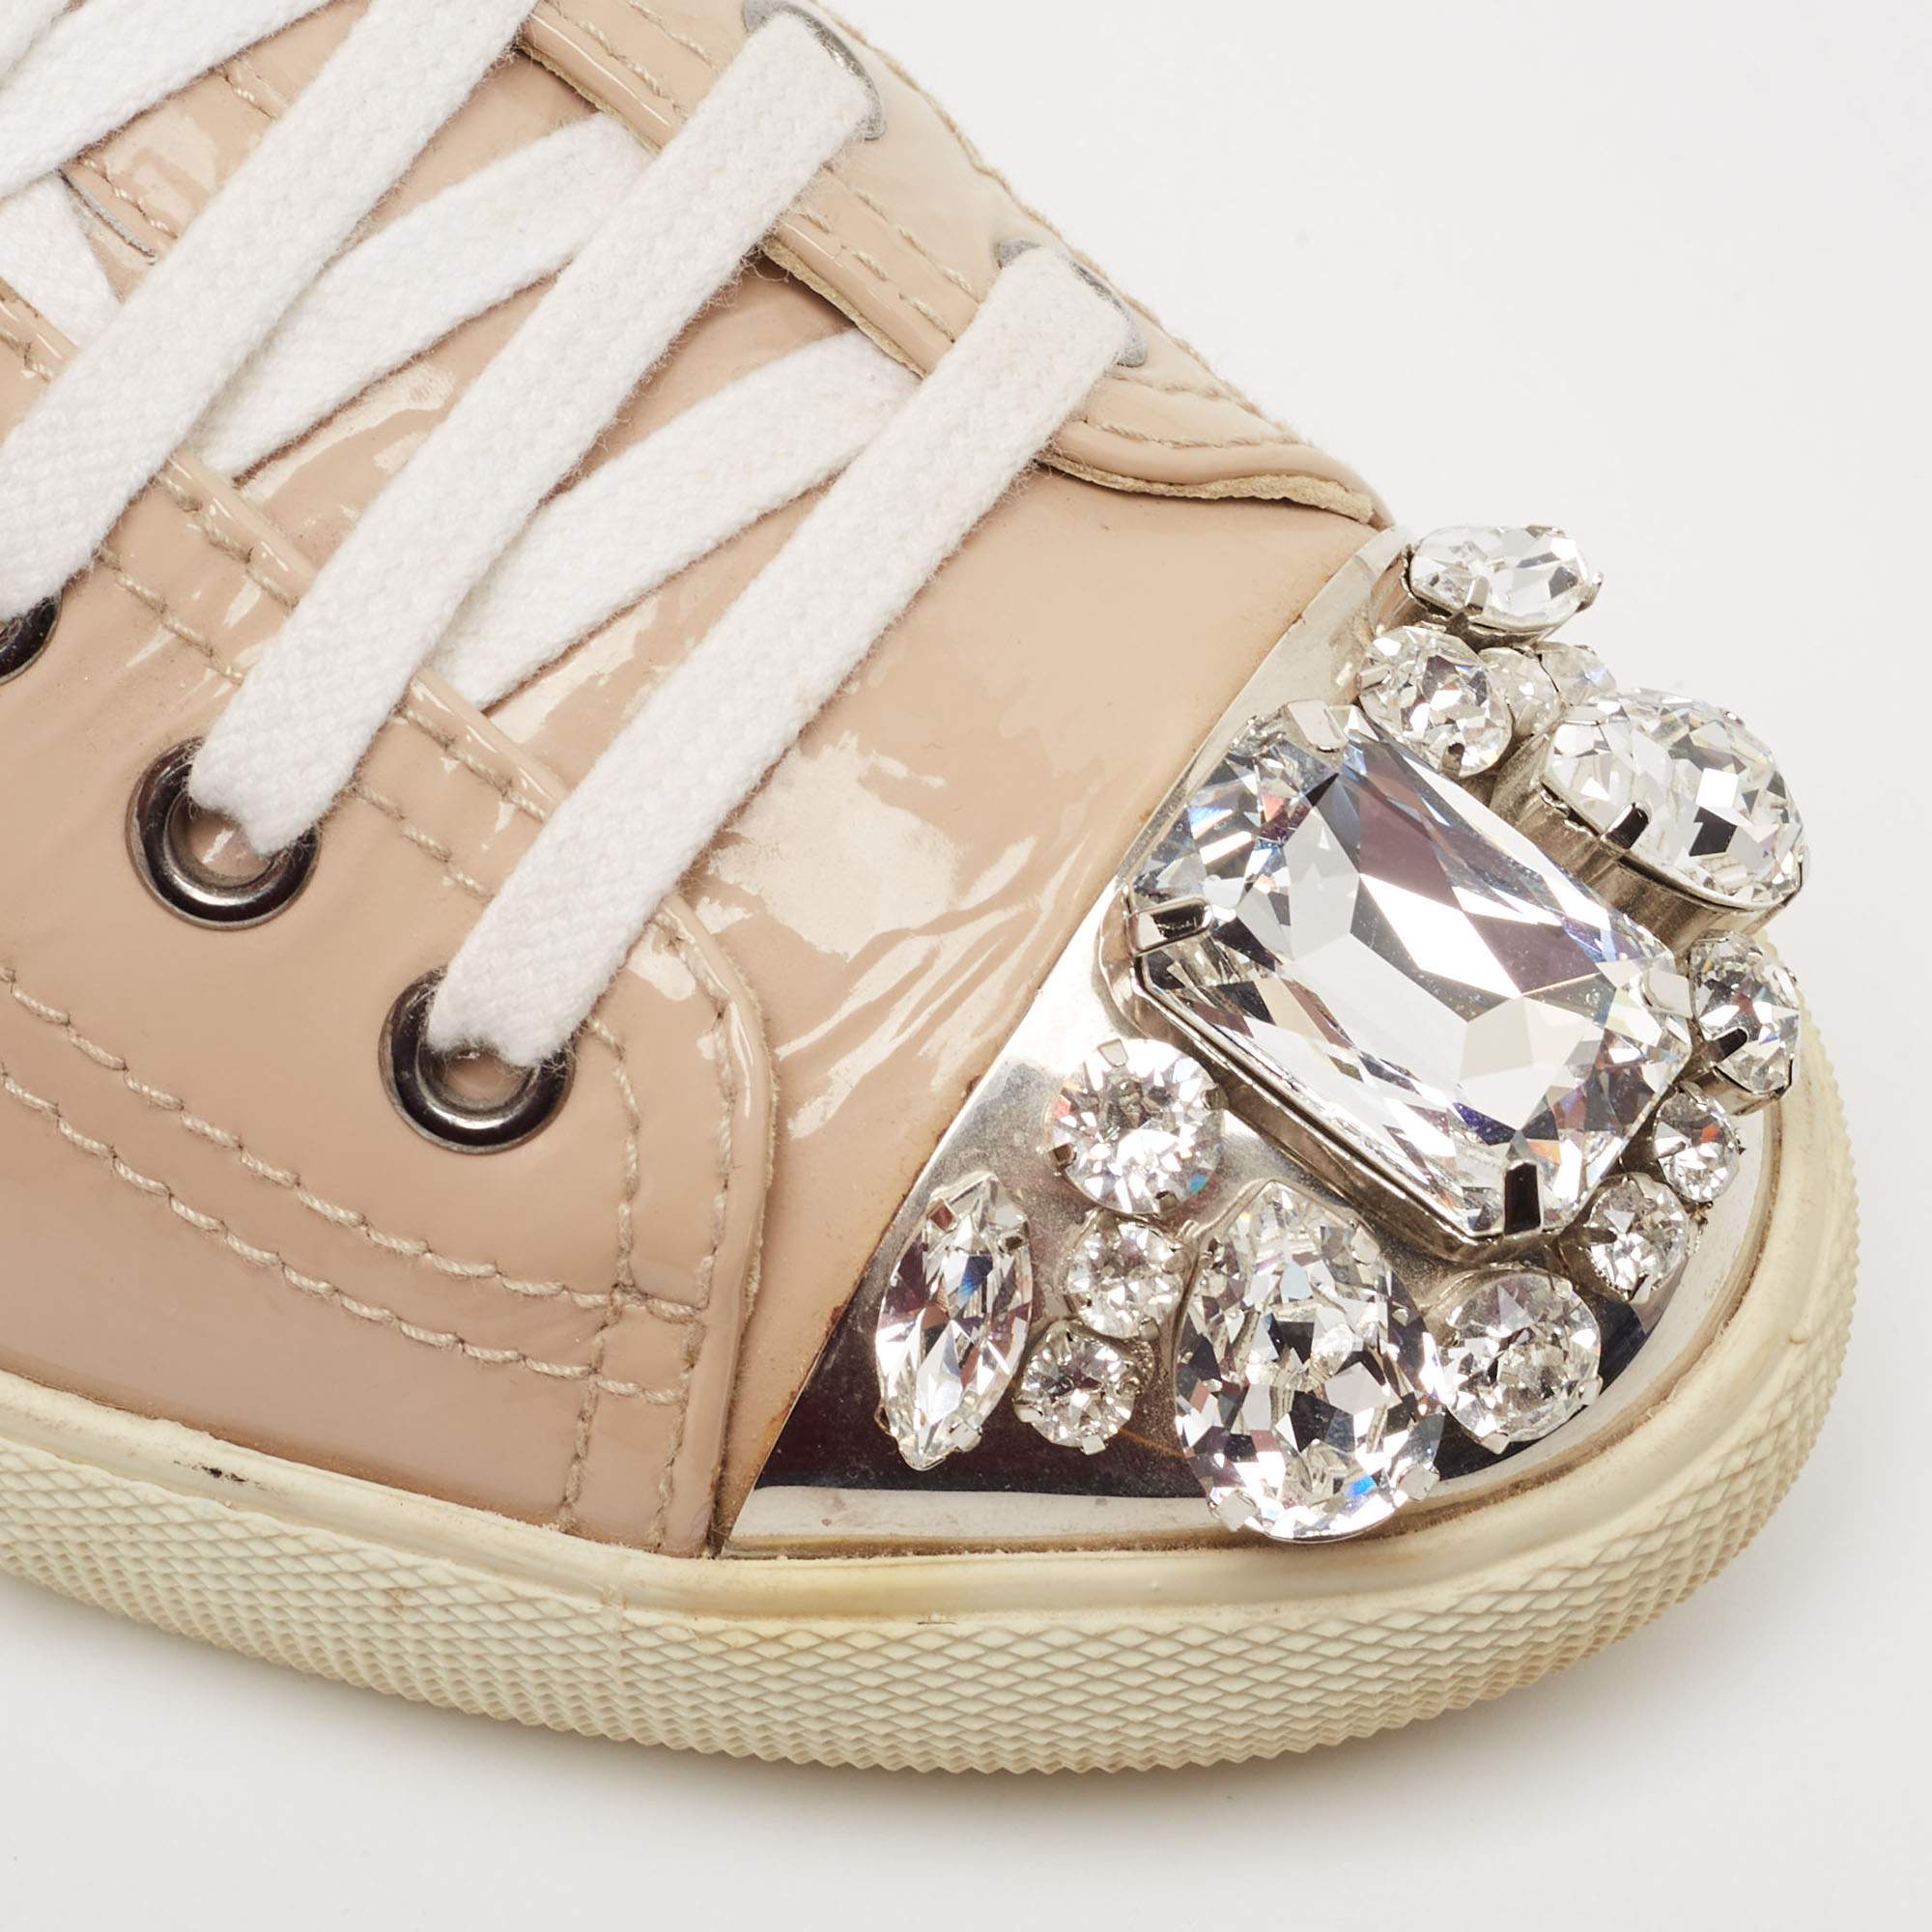 Miu Miu Beige Patent Leather Crystal Embellished Cap Toe Low Top Sneakers Size 36